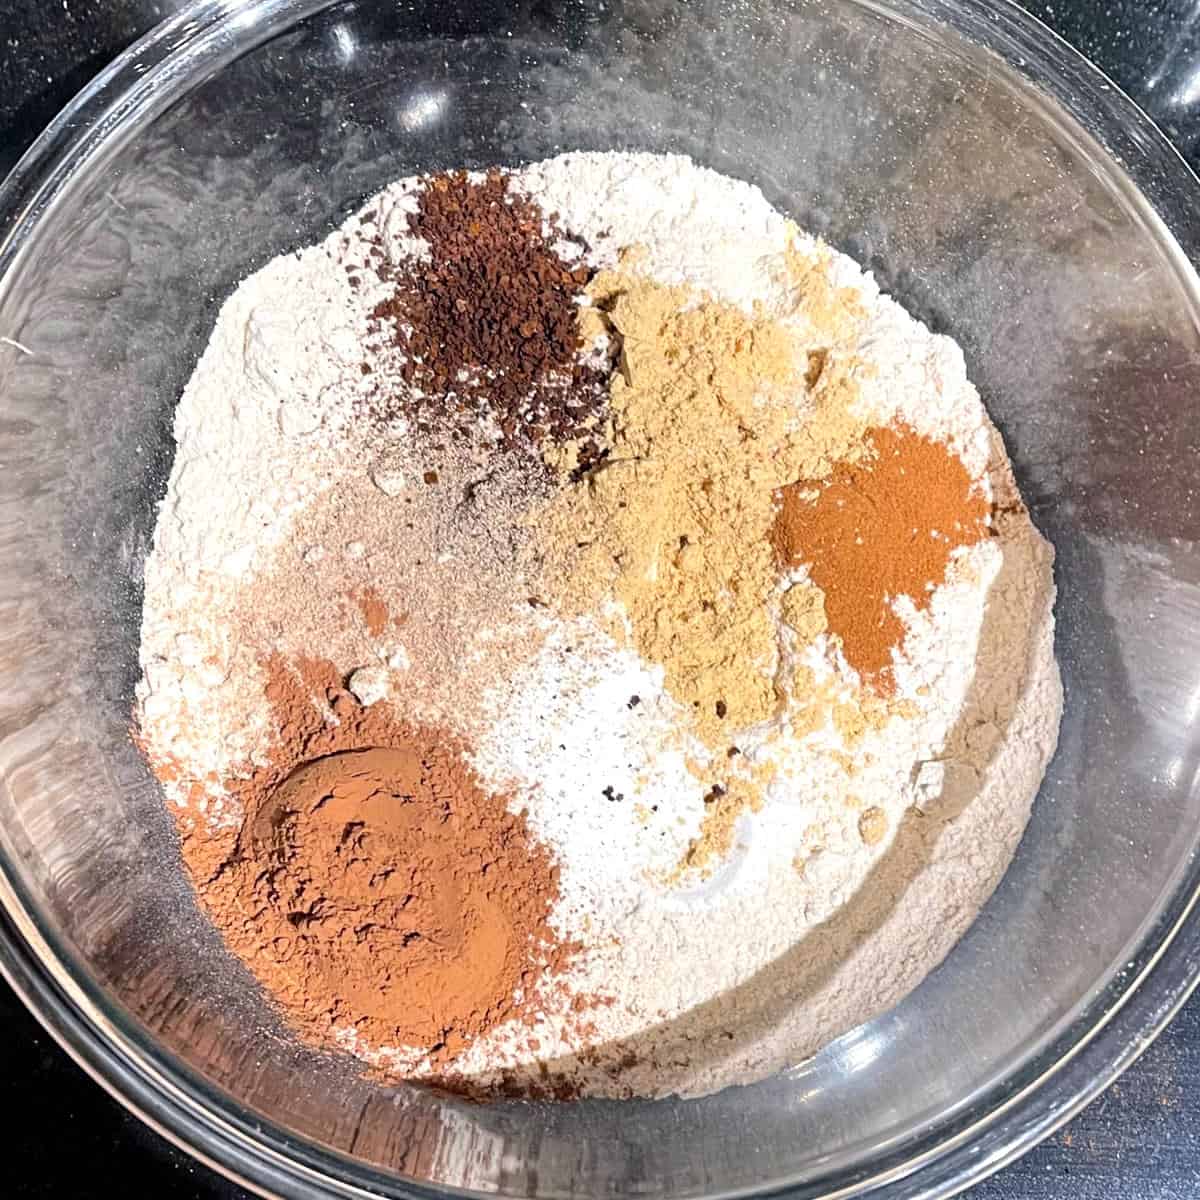 Dry ingredients for chocolate ginger cookies in glass bowl.